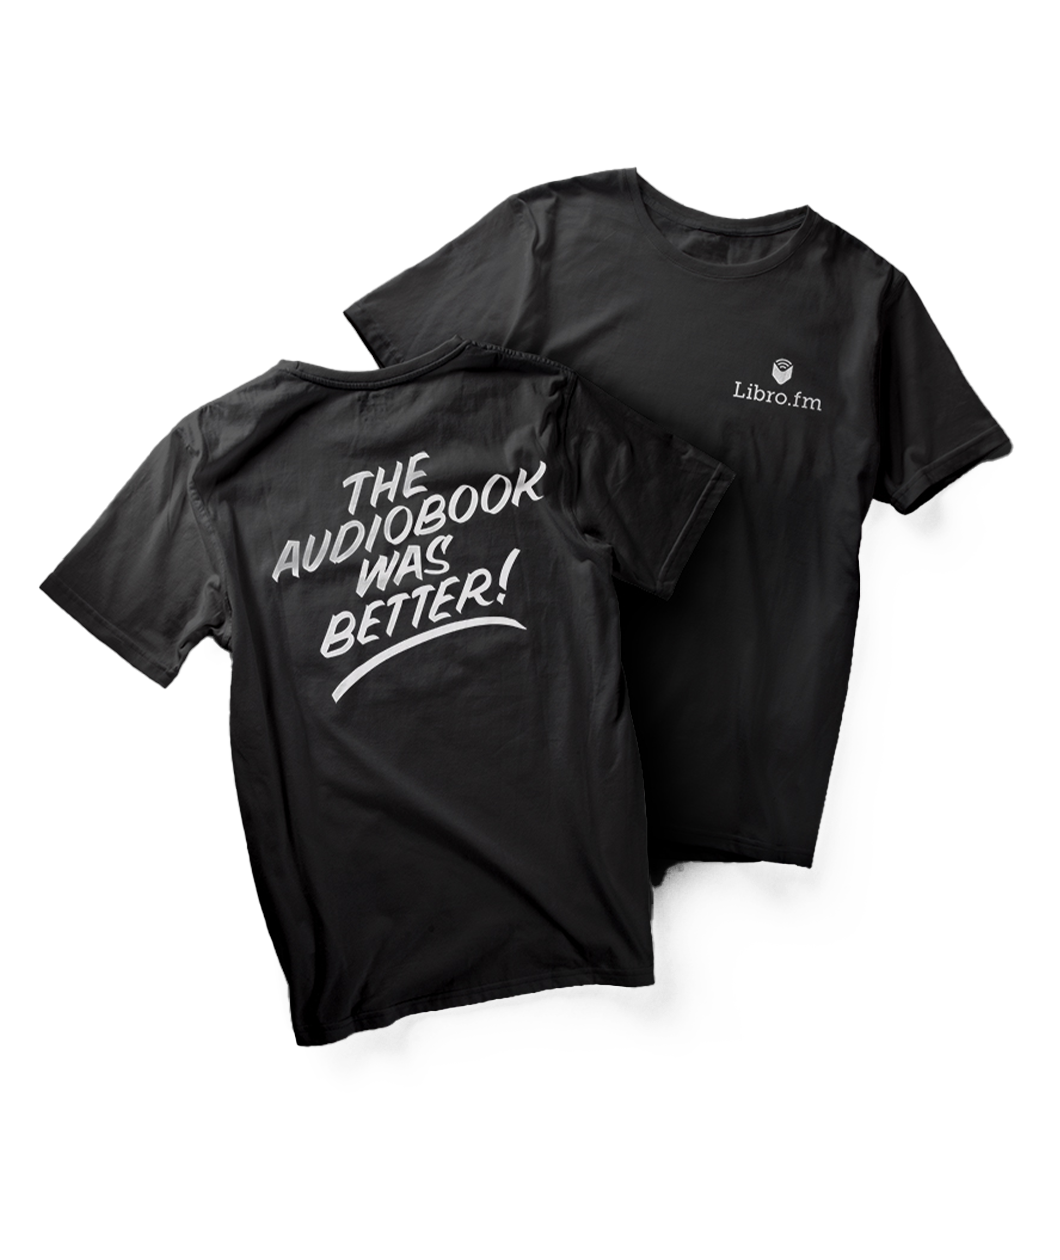 A black shirt with “Libro.fm” in white serif font in the top right. An open white book is above. On the back, “The aduiobook was better!” is in large white handwritten font and is underlined - from Libro.fm